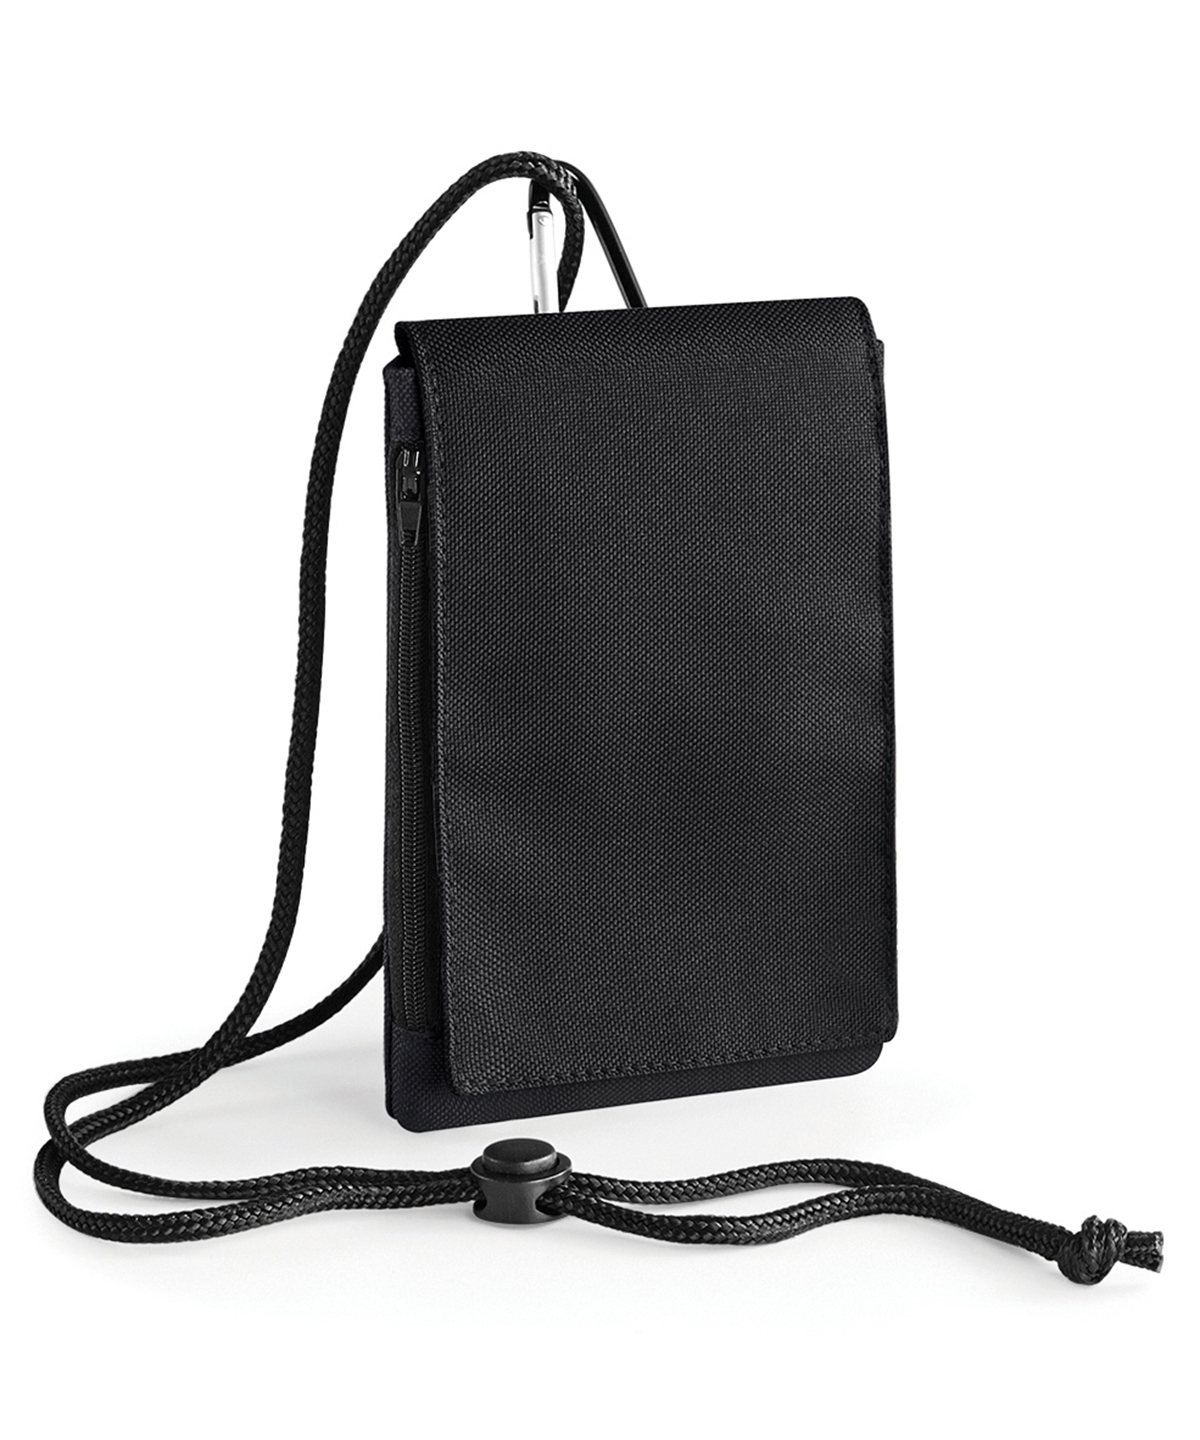 Phone Pouch Xl Black Size One Size